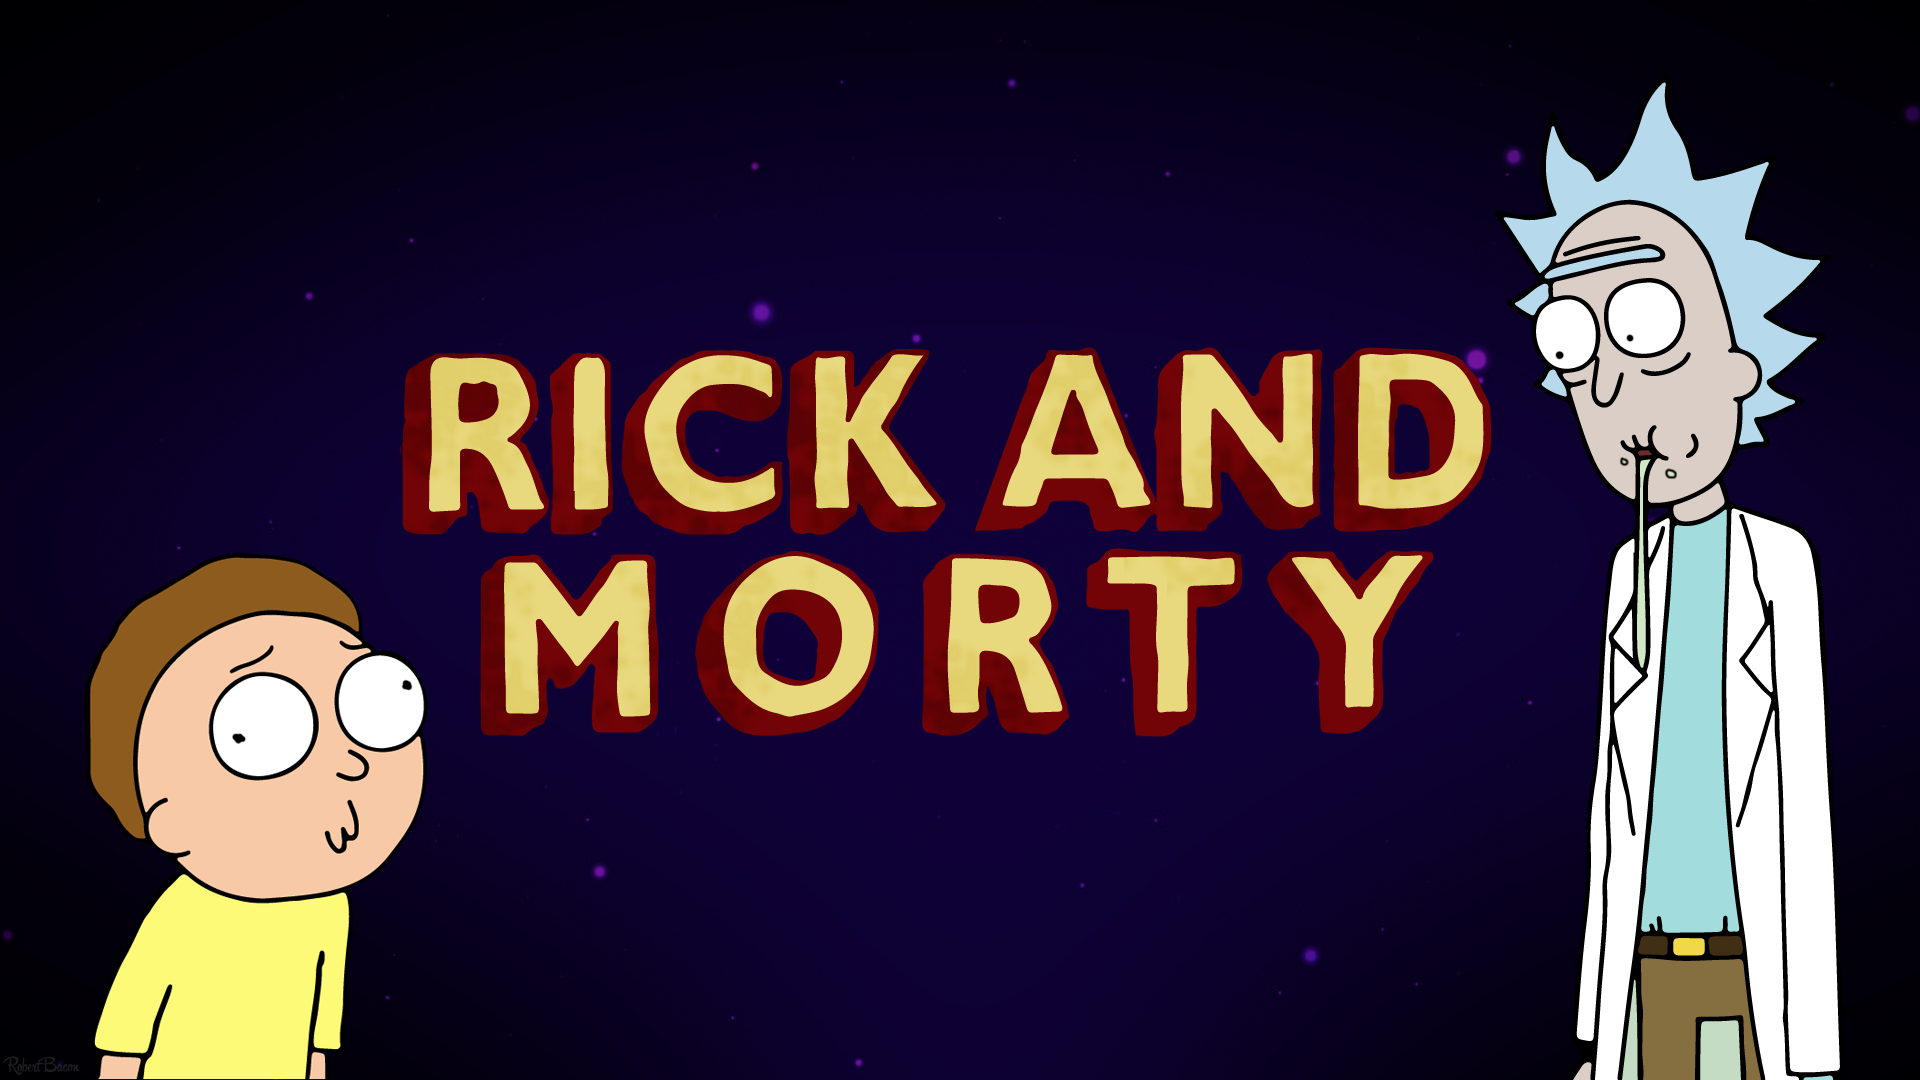 Rick and Morty TV Show Logo Wallpaper 63909 1920x1080px